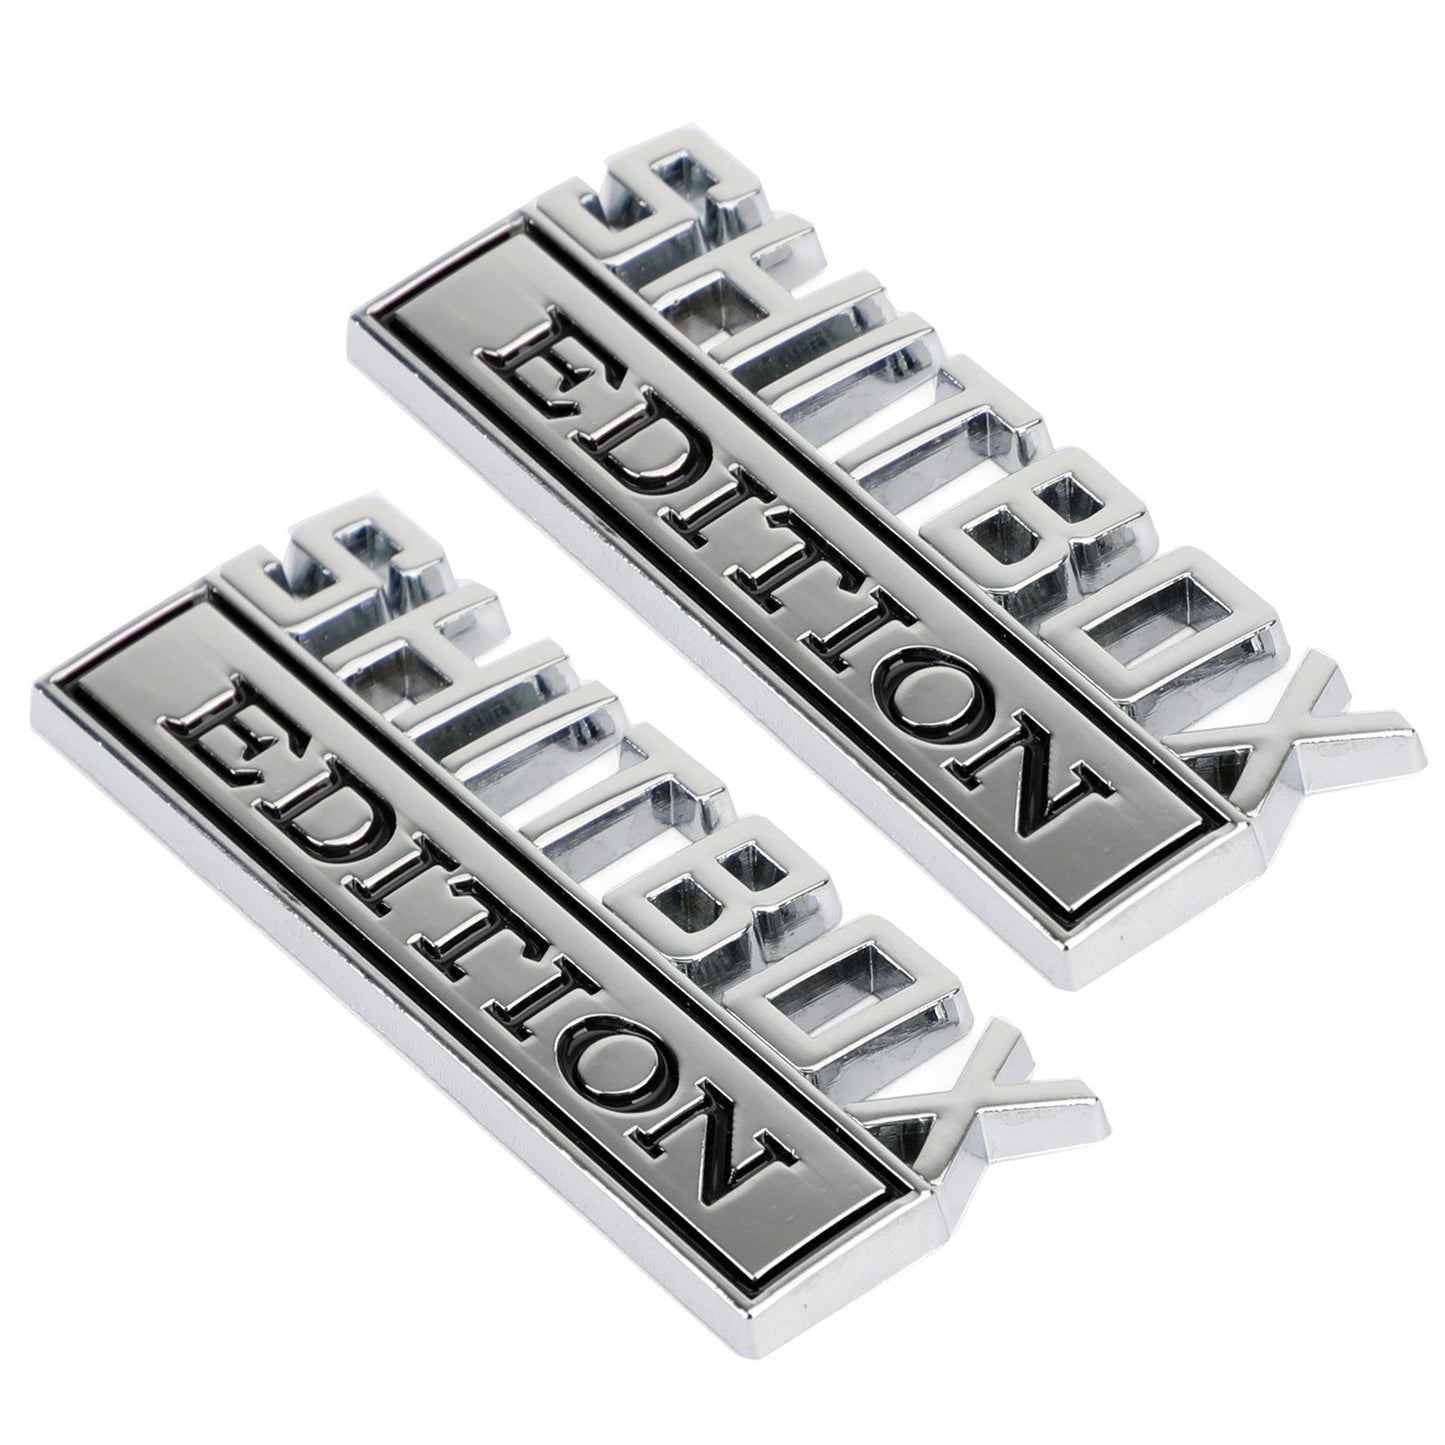 2pc Shitbox Edition Emblem Decal Badges Stickers For Ford Chevy Car Truck #B